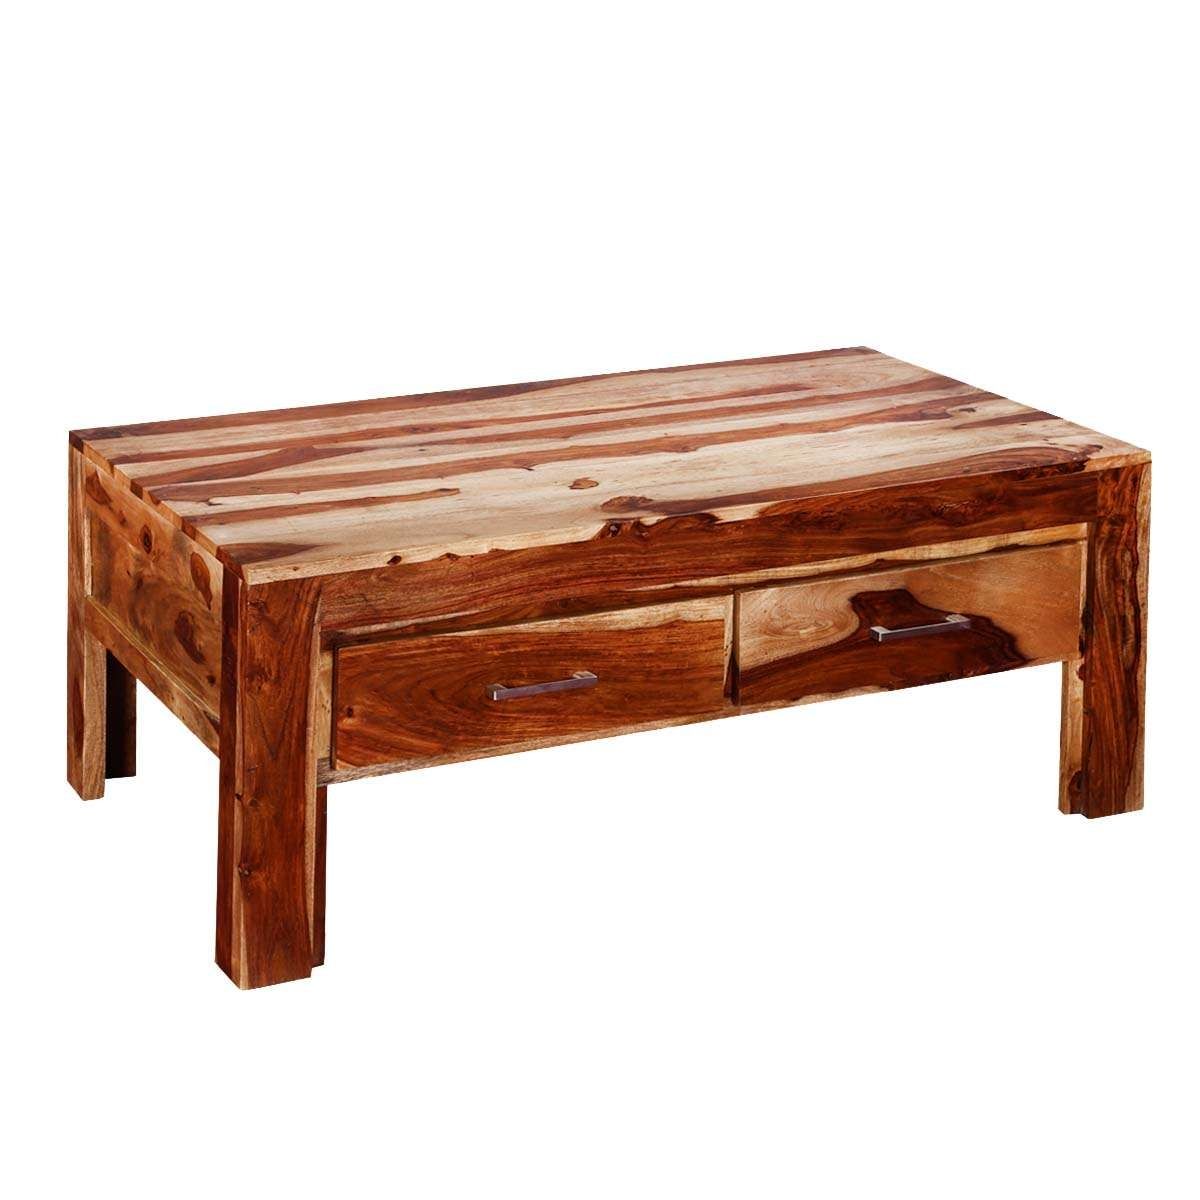 Popular Indian Coffee Tables With Frontier Indian Rosewood 45” Coffee Table W Drawers (View 10 of 20)